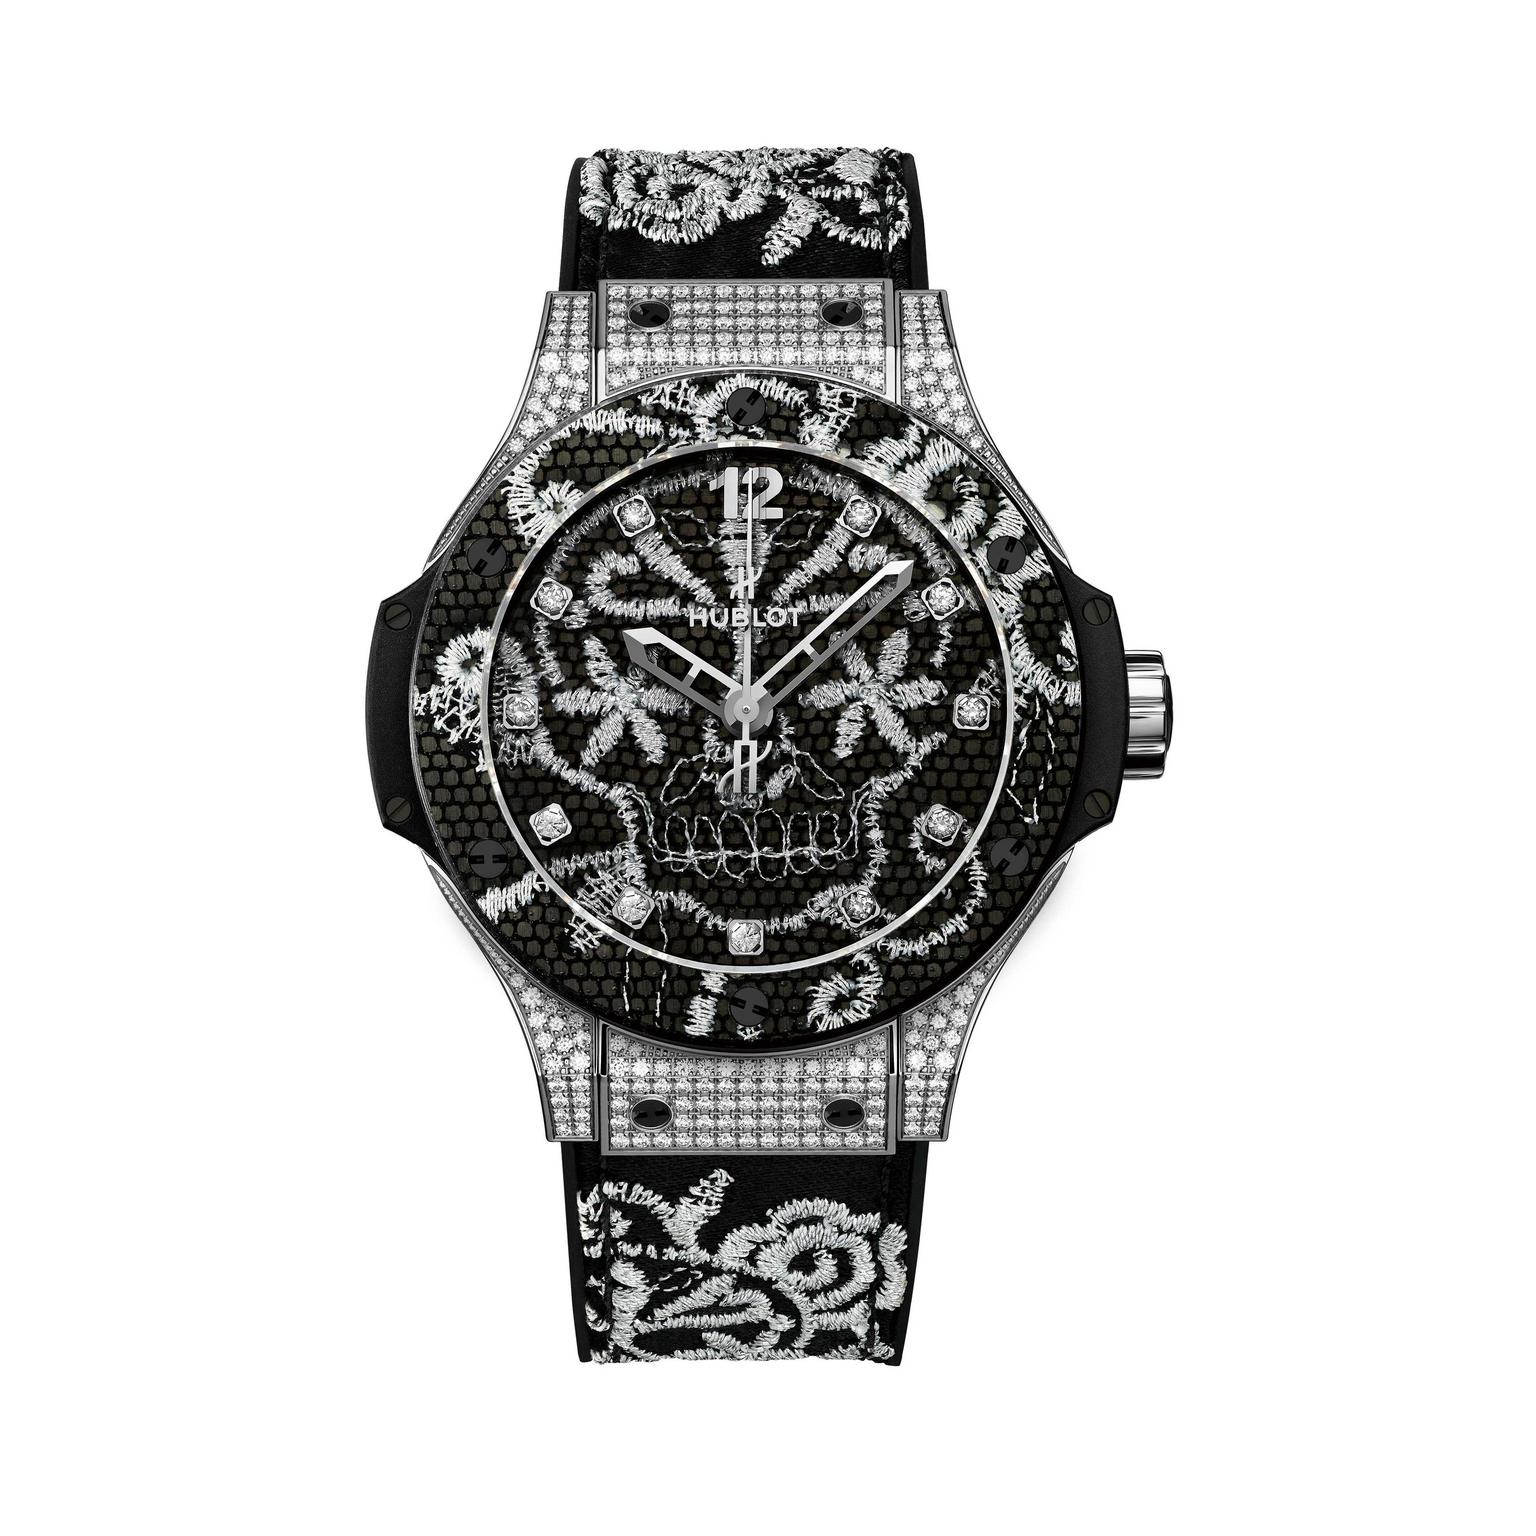 Hublot-black-and-silver-lace-watch